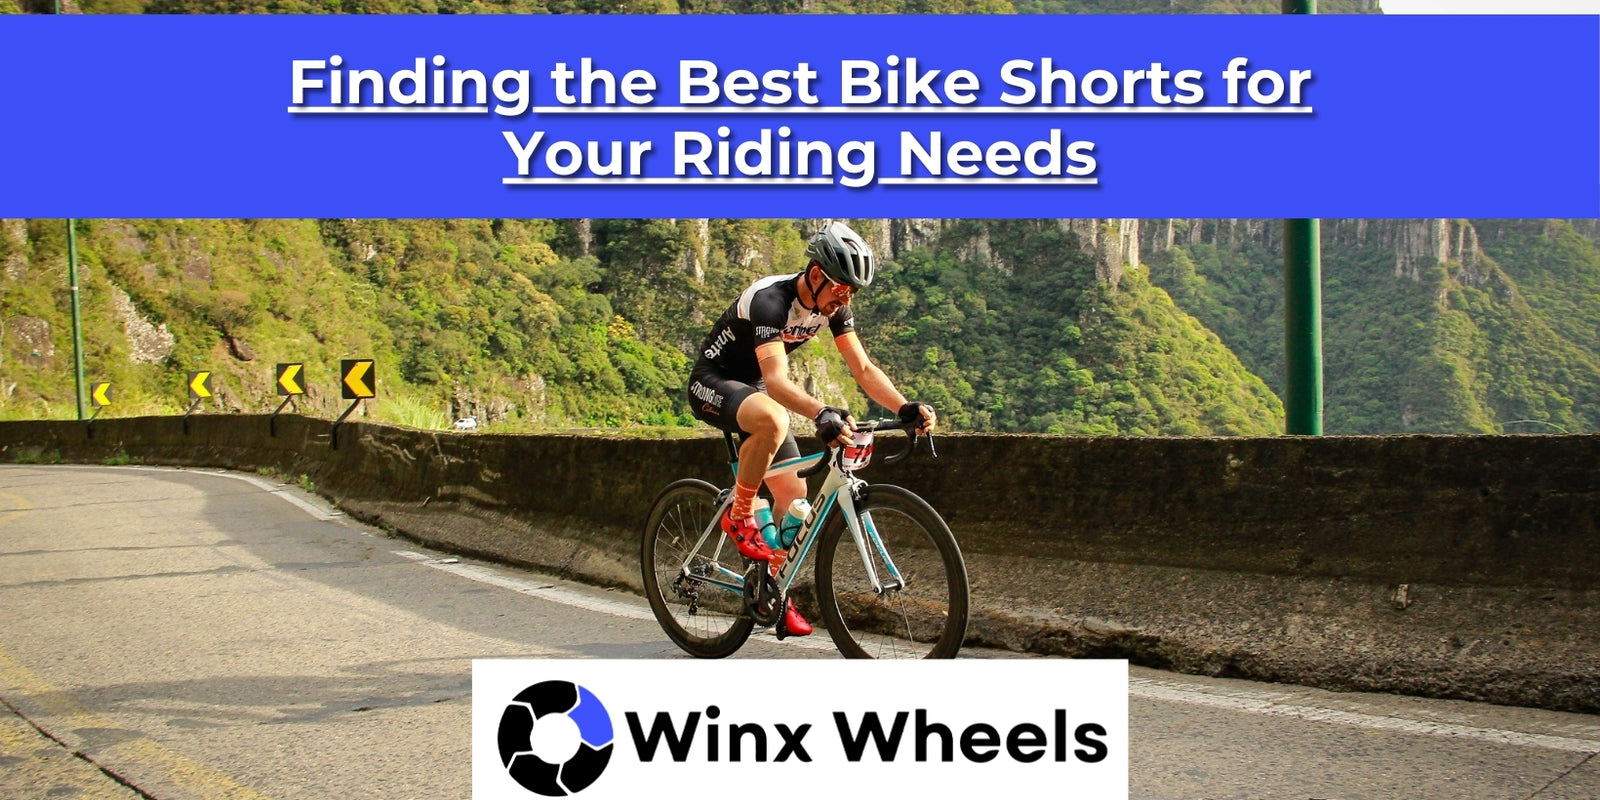 Finding the Best Bike Shorts for Your Riding Needs